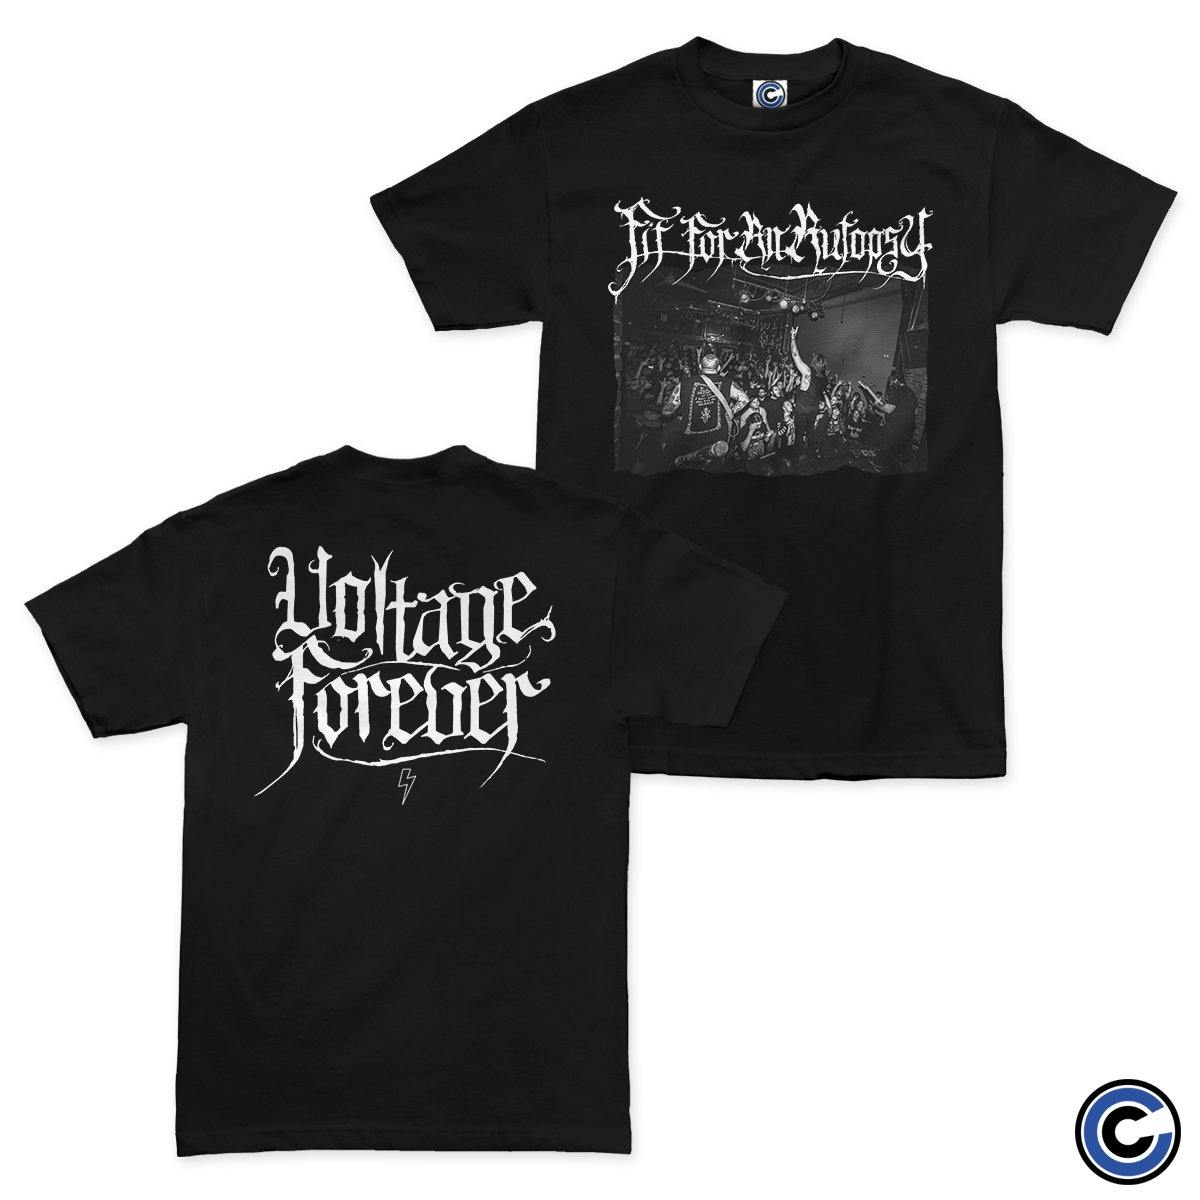 Buy – Voltage Lounge "Fit For An Autopsy" Shirt – Band & Music Merch – Cold Cuts Merch